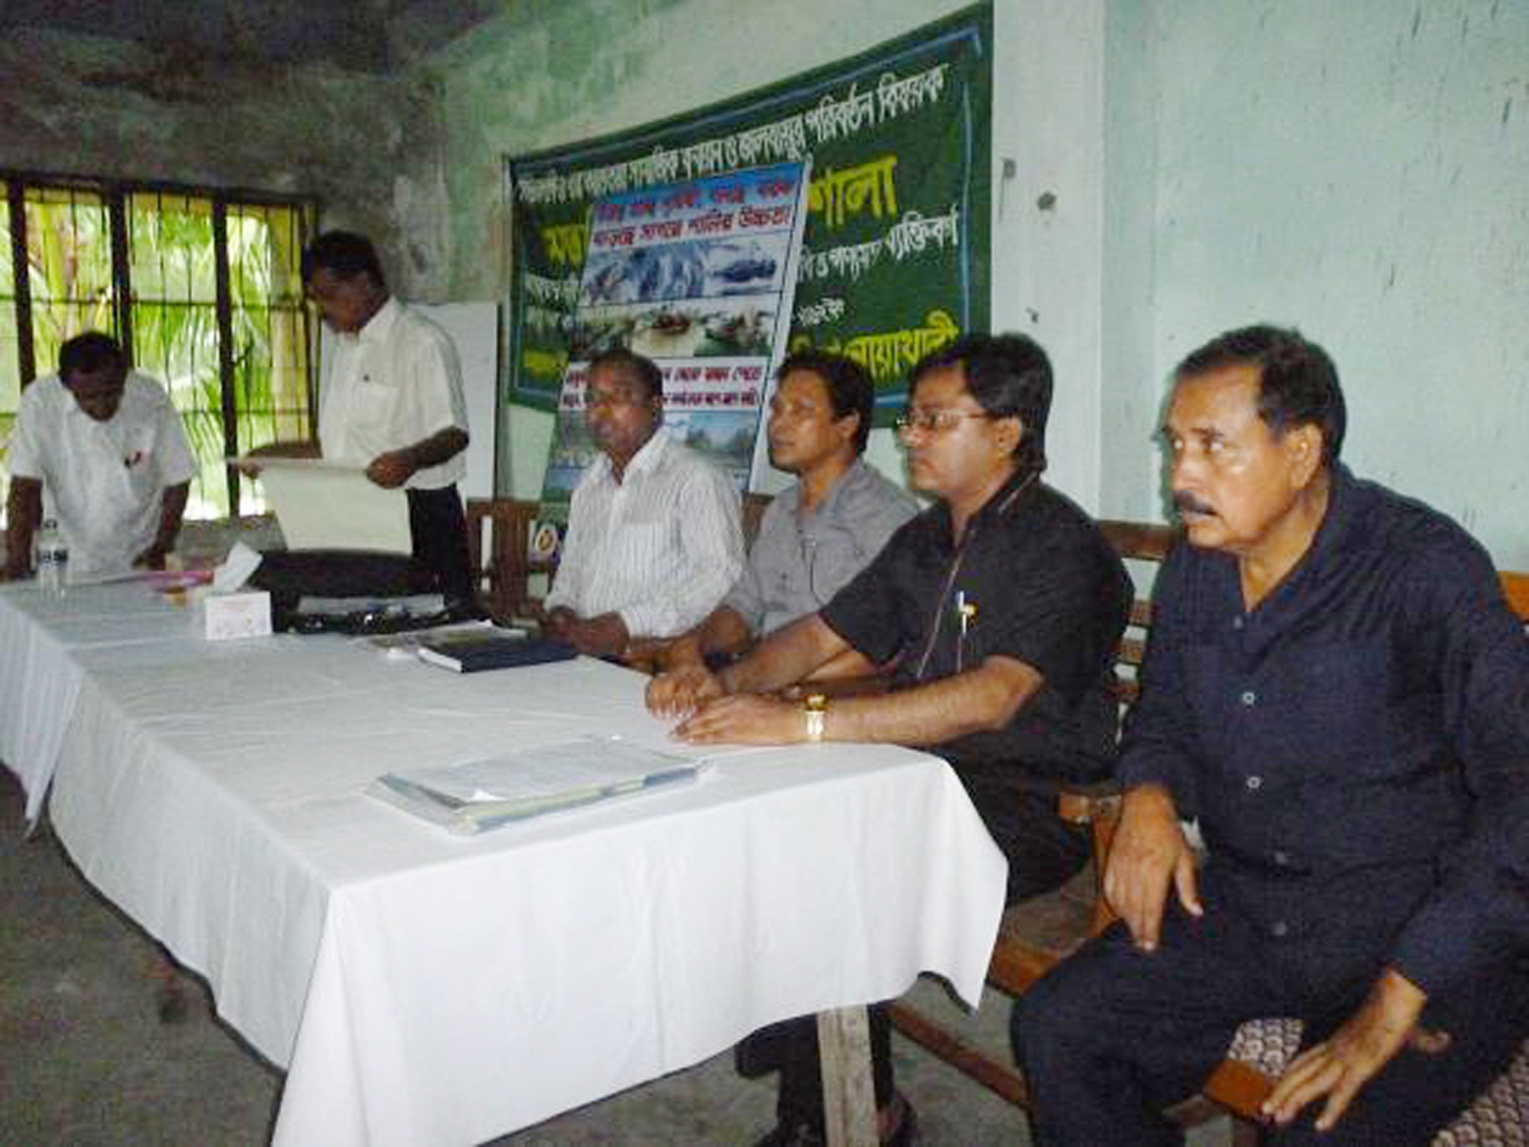 In the picture- Chairman of Begamganj-Sonaimuri Shikkha O Sastha Unnayan Foundation and Principal, Begumganj Technical & Computer Institute Md. Giash Uddin Mithu meets at the seminar organized by the Forest Department in the Charklark region of Noakhali to combat the adverse effects of climate change.